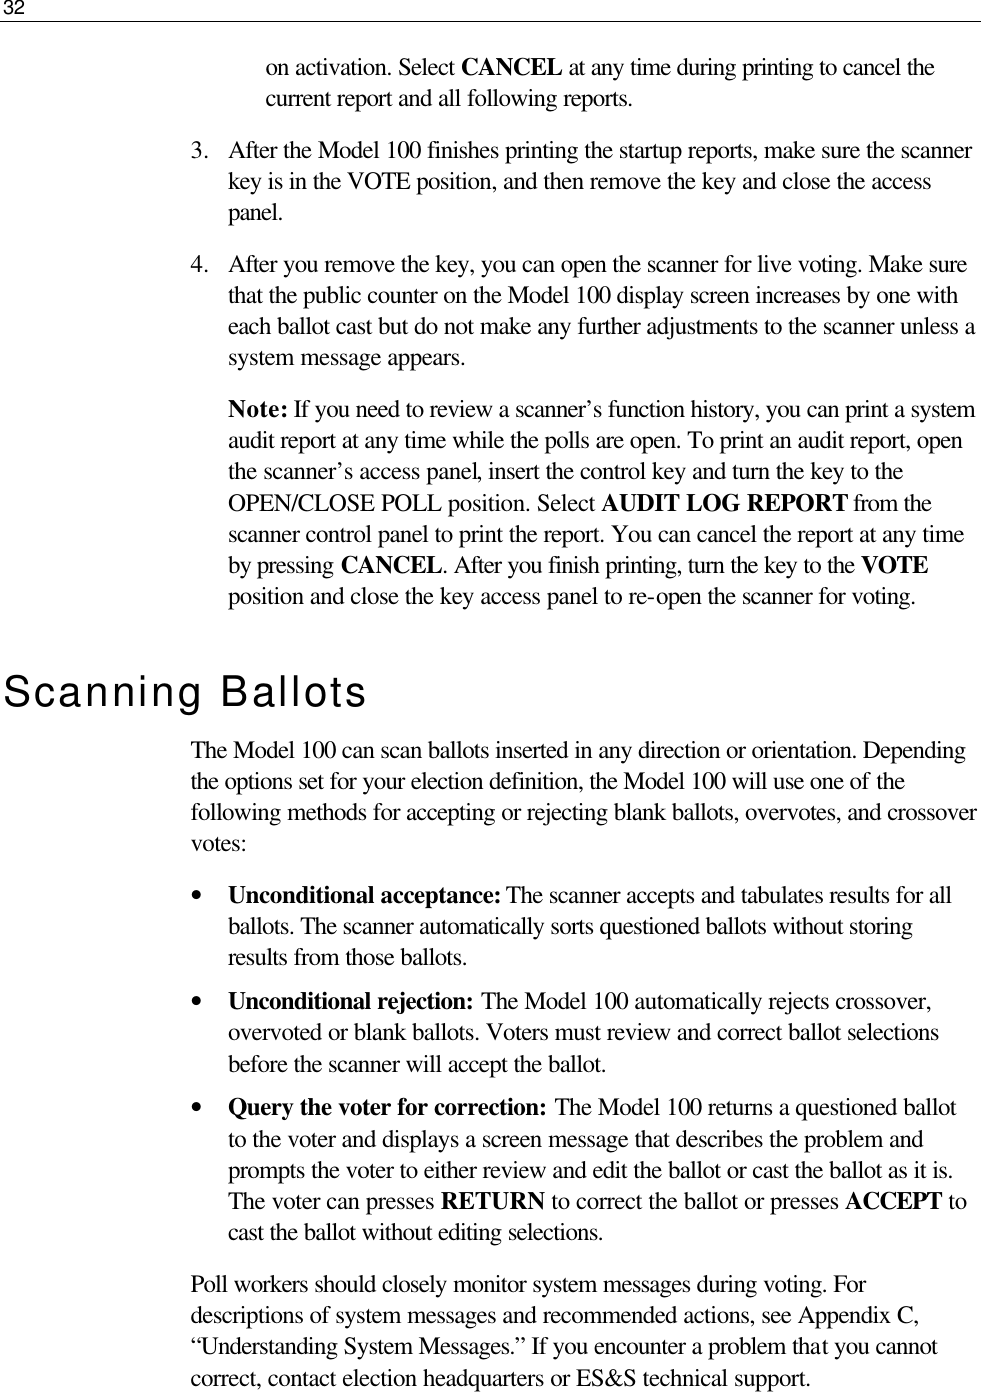 32  on activation. Select CANCEL at any time during printing to cancel the current report and all following reports.  3.  After the Model 100 finishes printing the startup reports, make sure the scanner key is in the VOTE position, and then remove the key and close the access panel. 4.  After you remove the key, you can open the scanner for live voting. Make sure that the public counter on the Model 100 display screen increases by one with each ballot cast but do not make any further adjustments to the scanner unless a system message appears.  Note: If you need to review a scanner’s function history, you can print a system audit report at any time while the polls are open. To print an audit report, open the scanner’s access panel, insert the control key and turn the key to the OPEN/CLOSE POLL position. Select AUDIT LOG REPORT from the scanner control panel to print the report. You can cancel the report at any time by pressing CANCEL. After you finish printing, turn the key to the VOTE position and close the key access panel to re-open the scanner for voting. Scanning Ballots The Model 100 can scan ballots inserted in any direction or orientation. Depending the options set for your election definition, the Model 100 will use one of the following methods for accepting or rejecting blank ballots, overvotes, and crossover votes: • Unconditional acceptance: The scanner accepts and tabulates results for all ballots. The scanner automatically sorts questioned ballots without storing results from those ballots.  • Unconditional rejection: The Model 100 automatically rejects crossover, overvoted or blank ballots. Voters must review and correct ballot selections before the scanner will accept the ballot. • Query the voter for correction: The Model 100 returns a questioned ballot to the voter and displays a screen message that describes the problem and prompts the voter to either review and edit the ballot or cast the ballot as it is. The voter can presses RETURN to correct the ballot or presses ACCEPT to cast the ballot without editing selections. Poll workers should closely monitor system messages during voting. For descriptions of system messages and recommended actions, see Appendix C, “Understanding System Messages.” If you encounter a problem that you cannot correct, contact election headquarters or ES&amp;S technical support. 